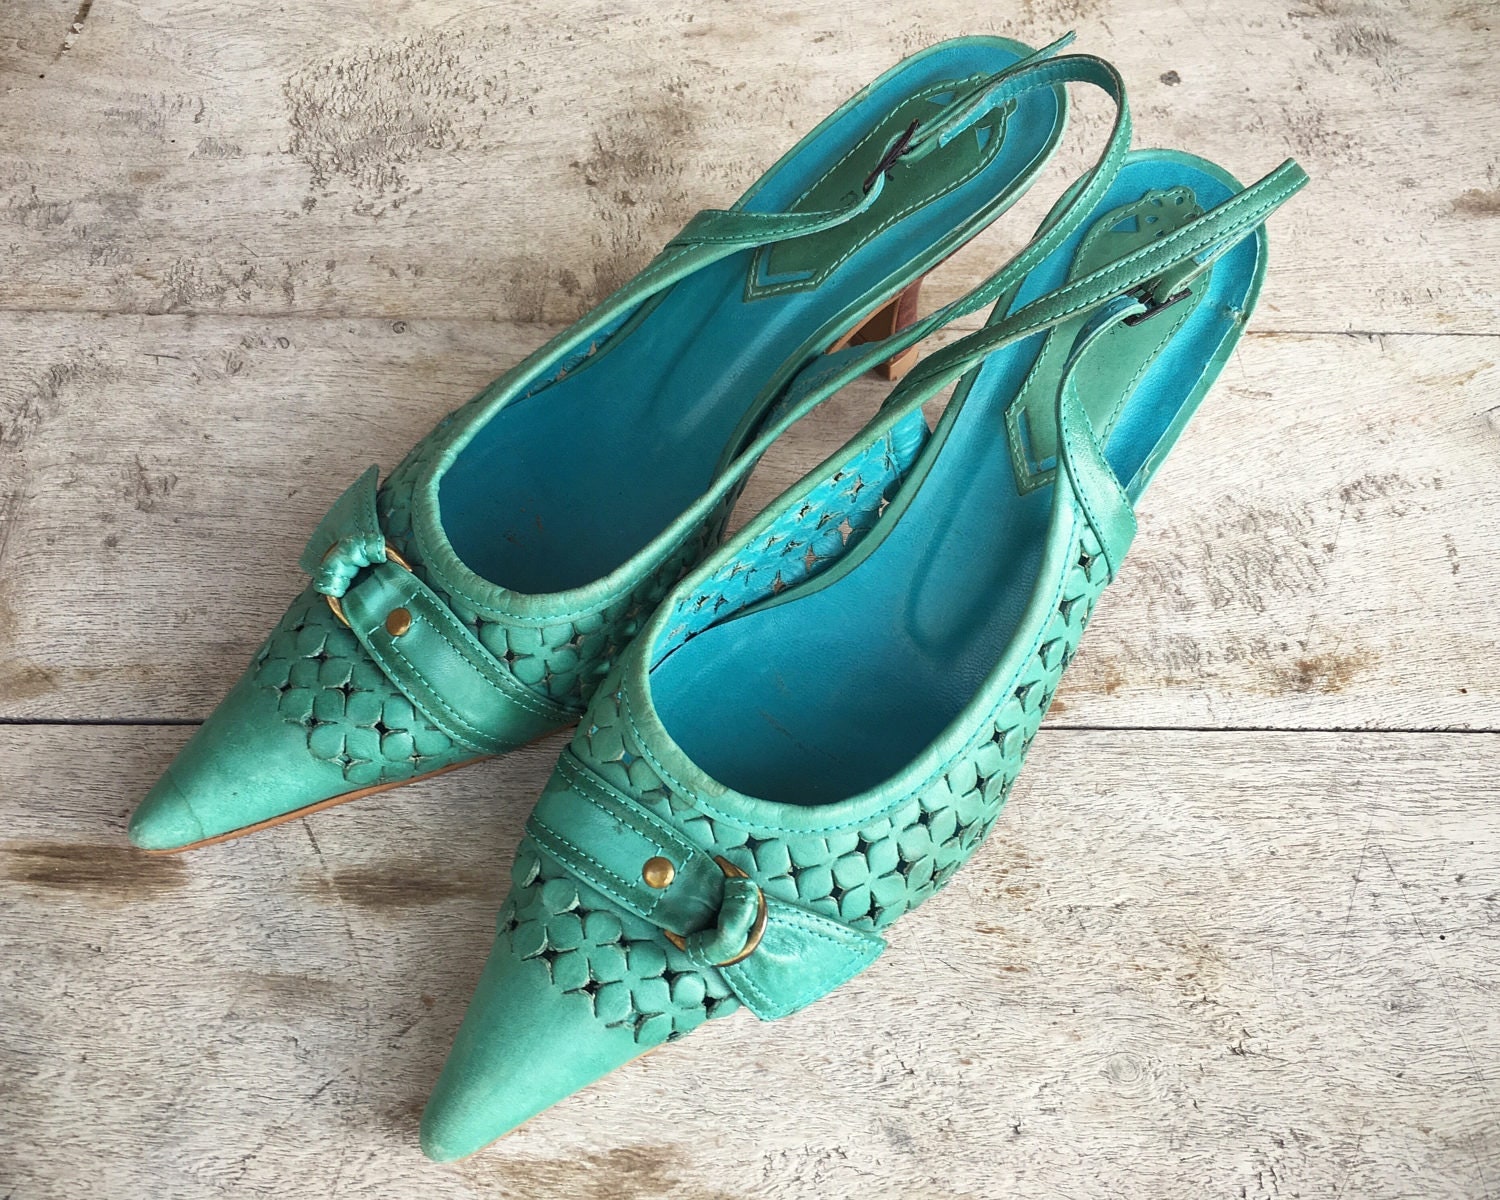 1980s Women's size EU 37 (US size 7) sling back pumps turquoise leather ...